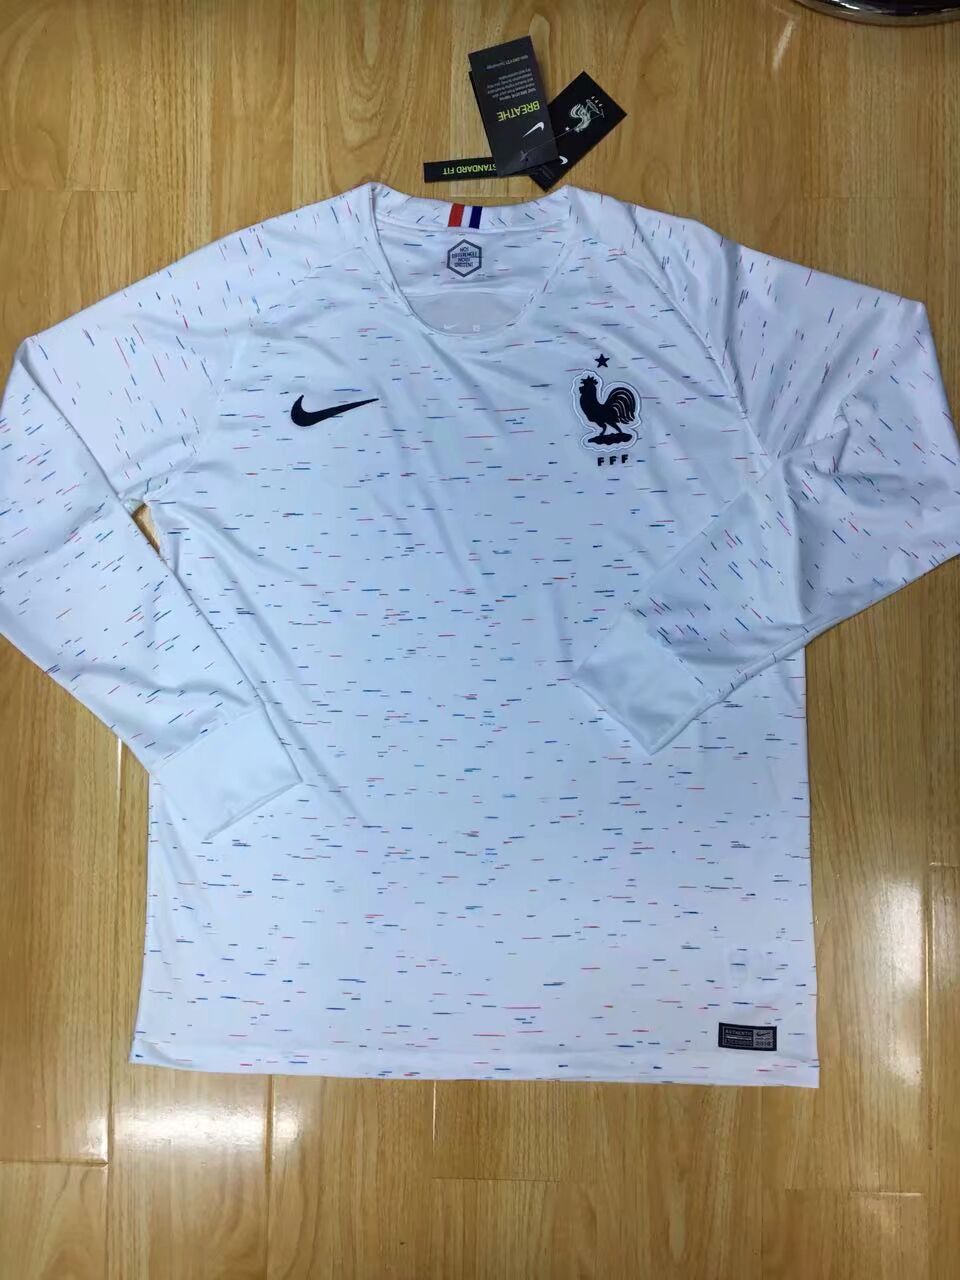 France 2018 World Cup LS Away Soccer Jersey